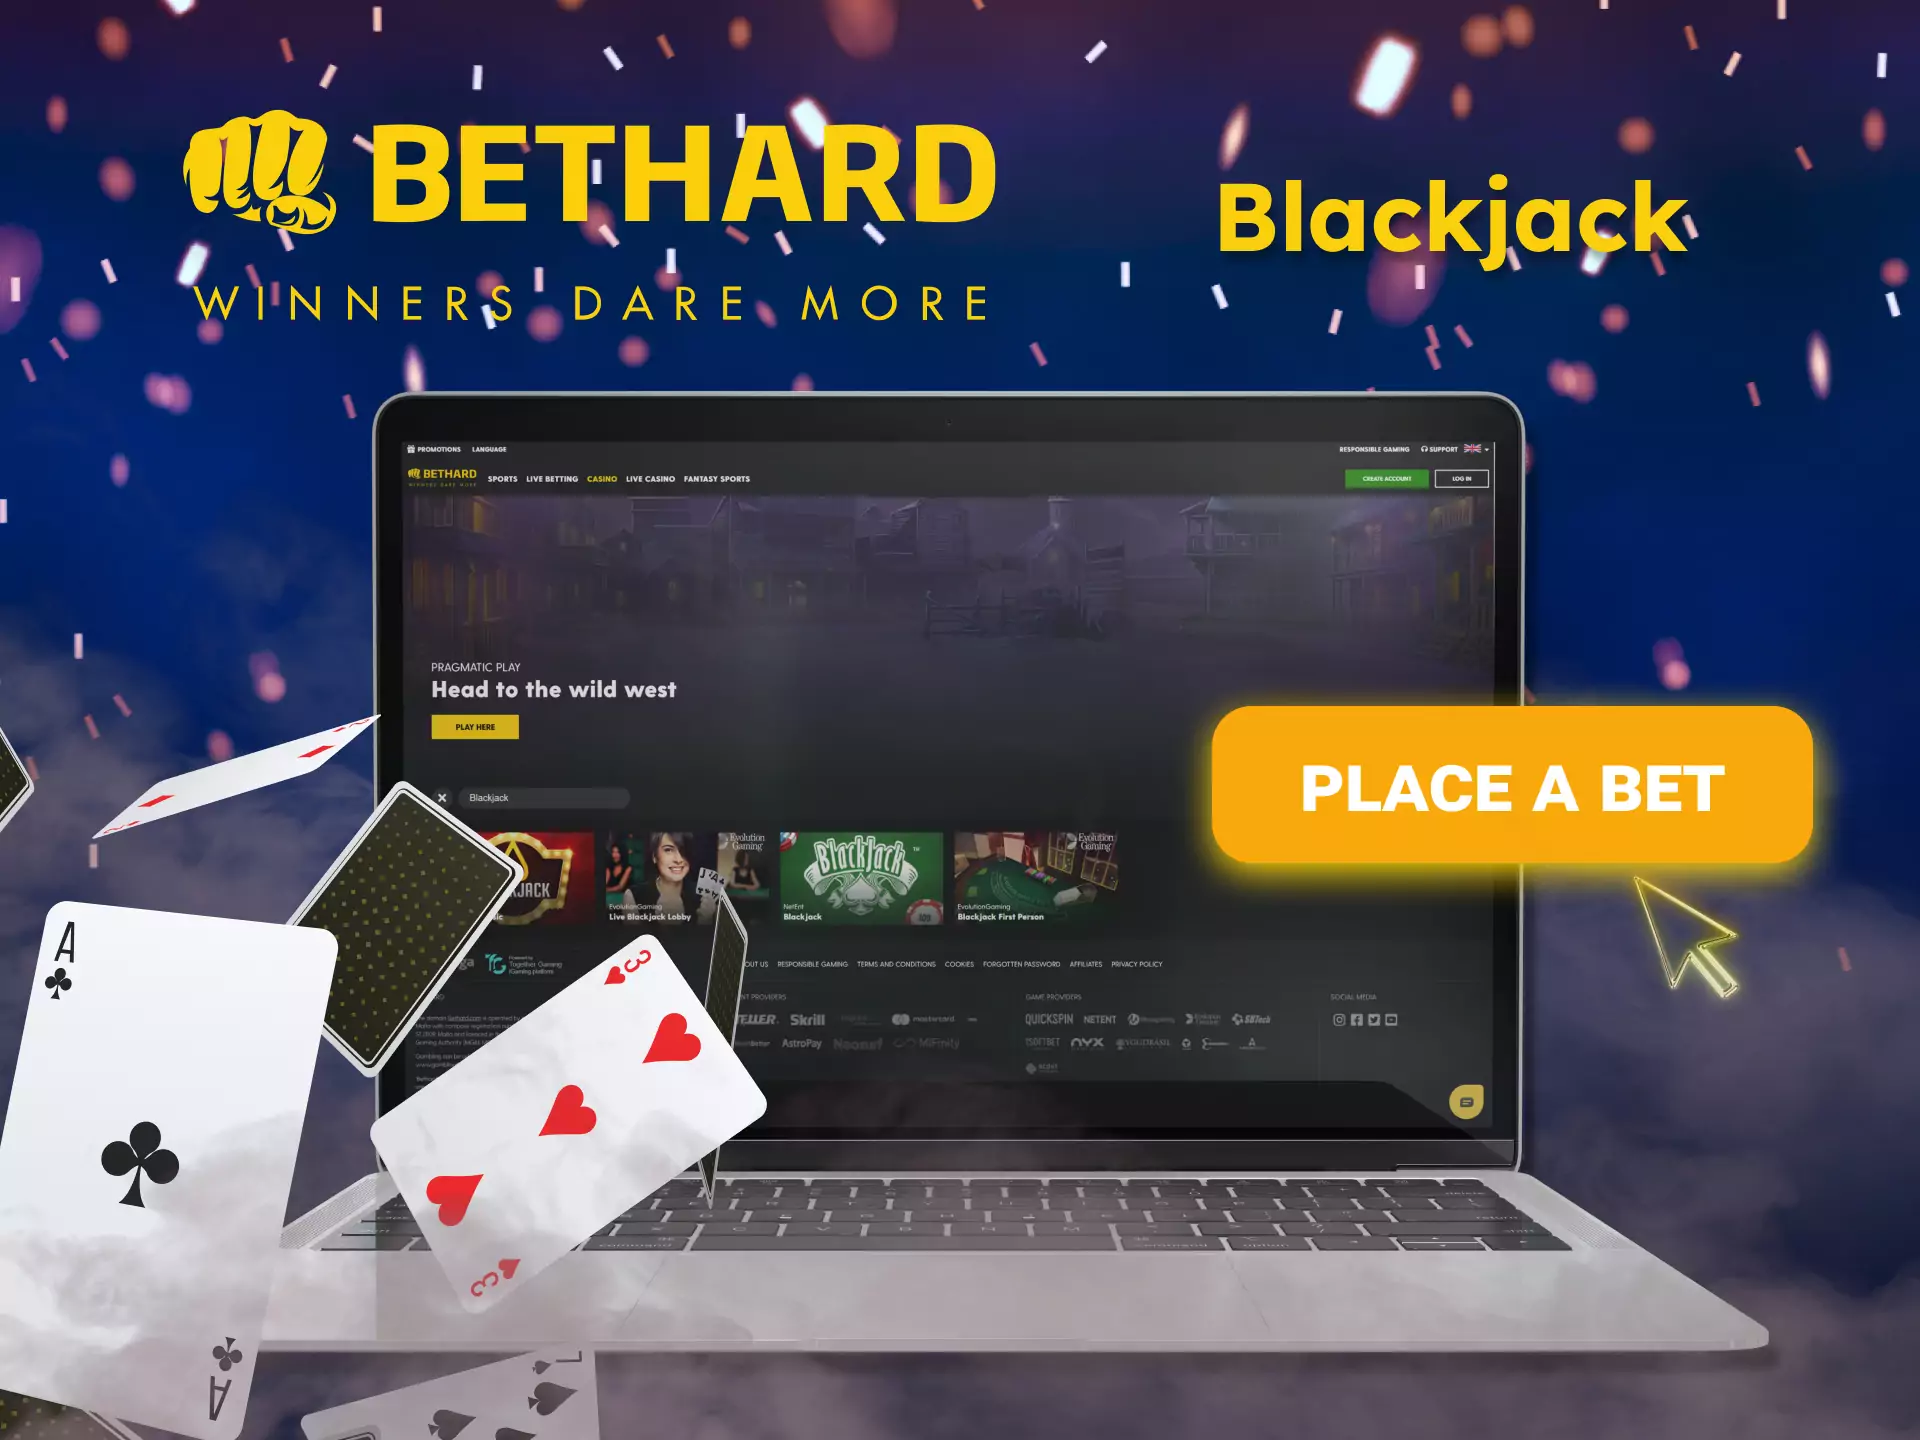 At the Bethard online casino, you can play blackjack besides other card games.